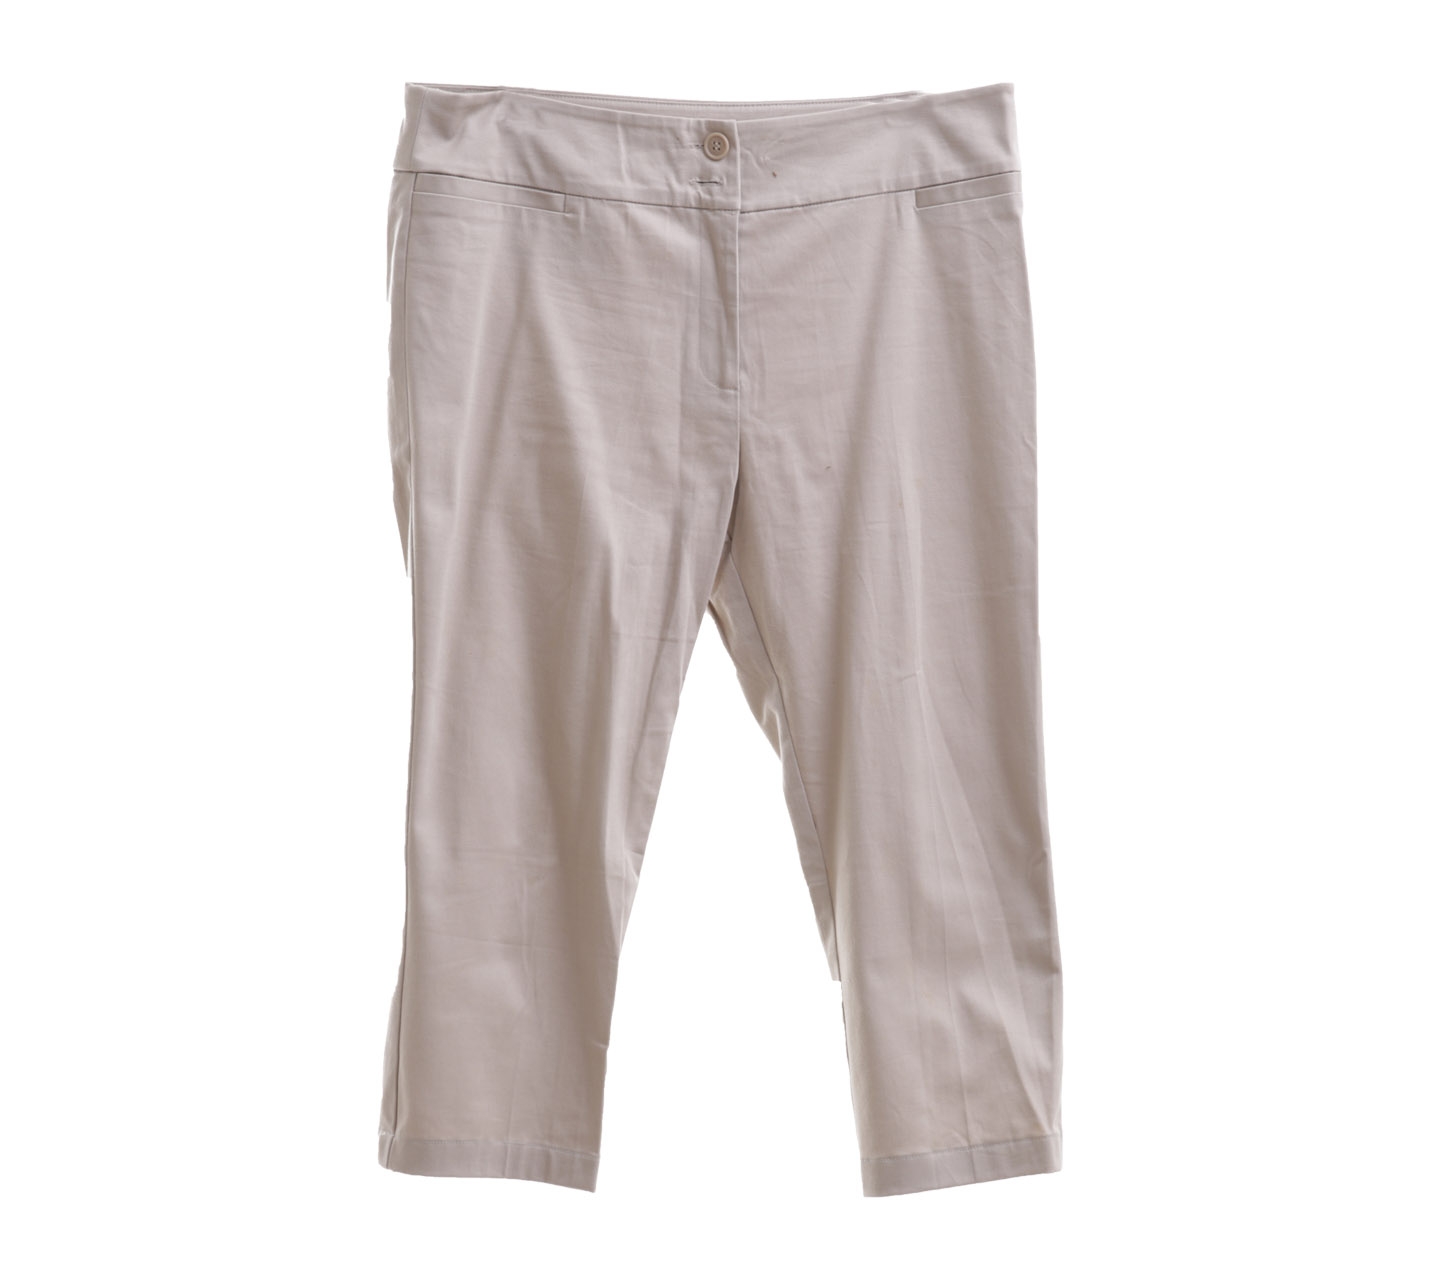 Dunnes Stores Cream Trousers